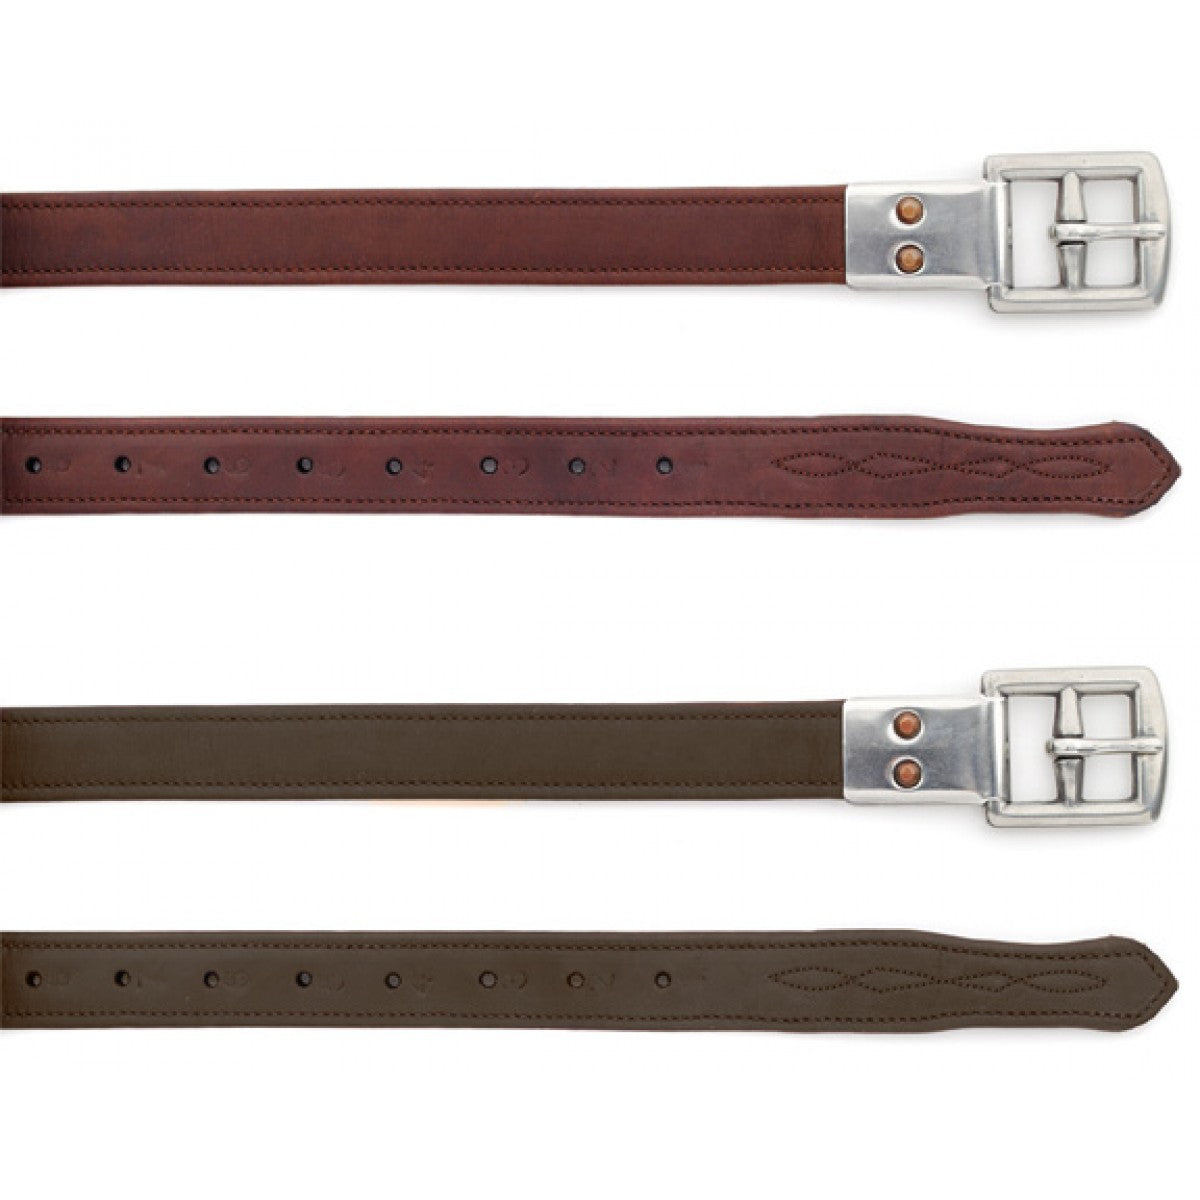 Ovation® Covered Stirrup Leathers With Metal Clasp